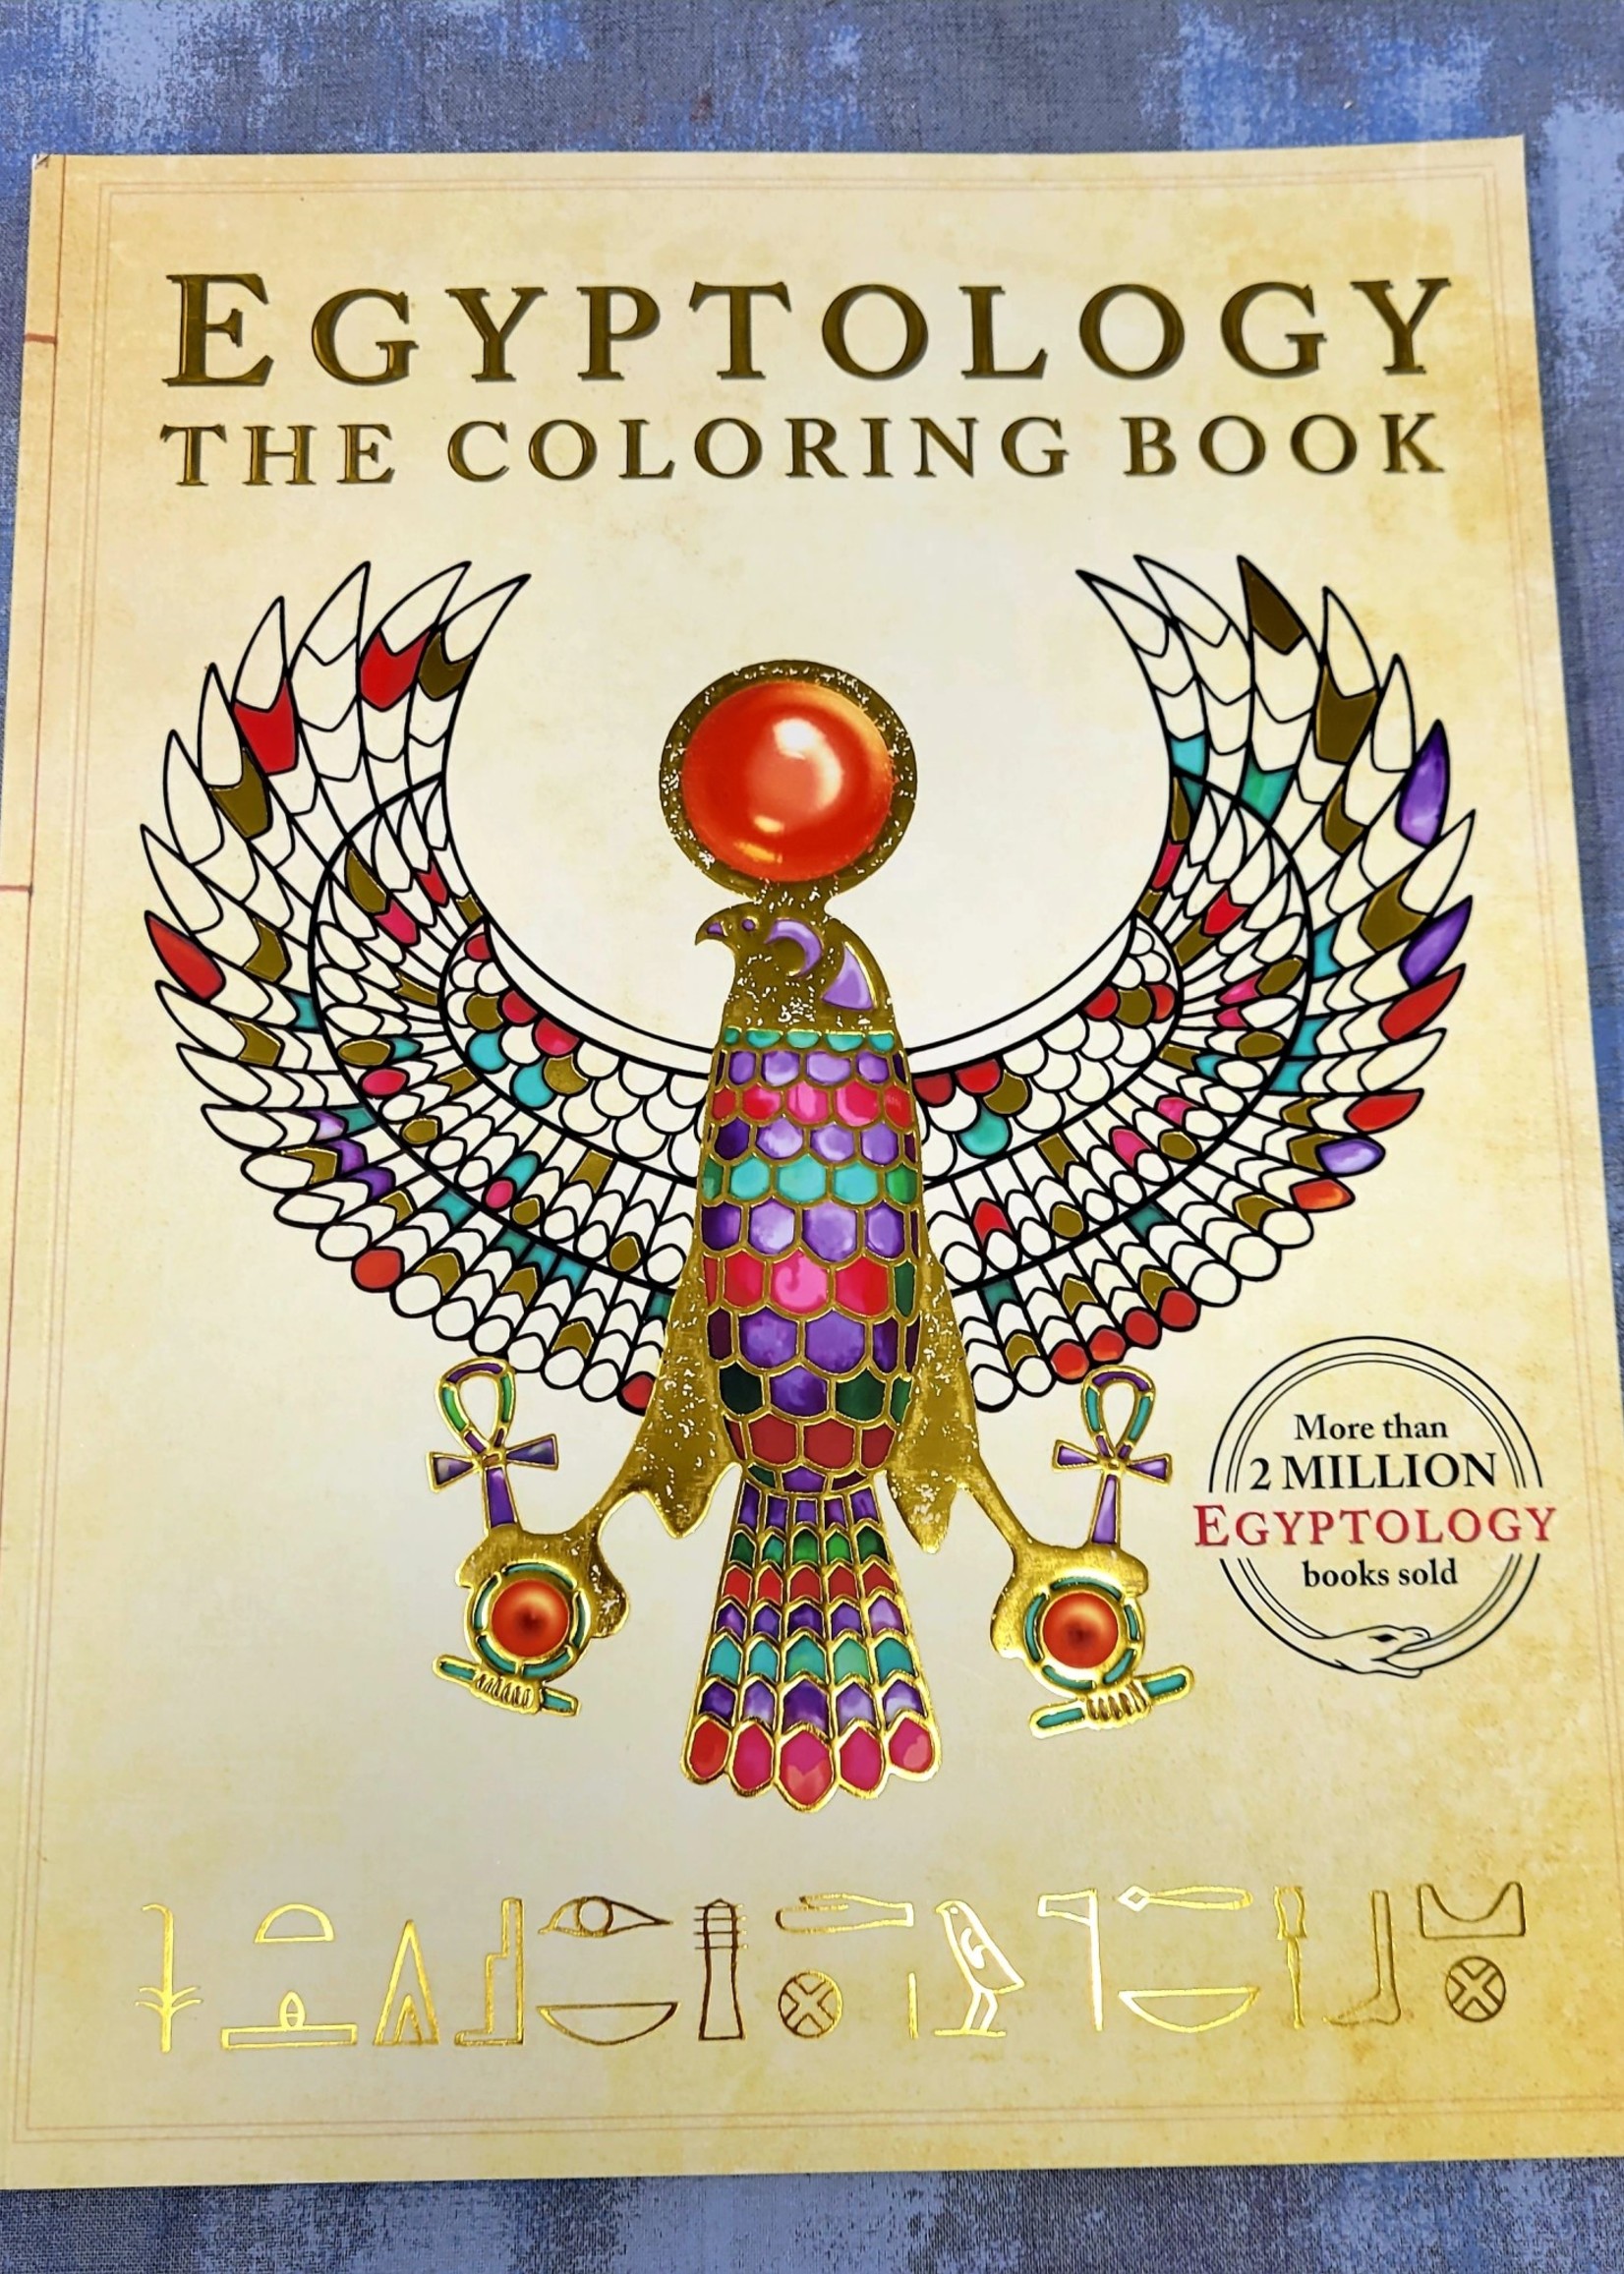 Egyptology Coloring Book By Emily Sands Illustrated by Various